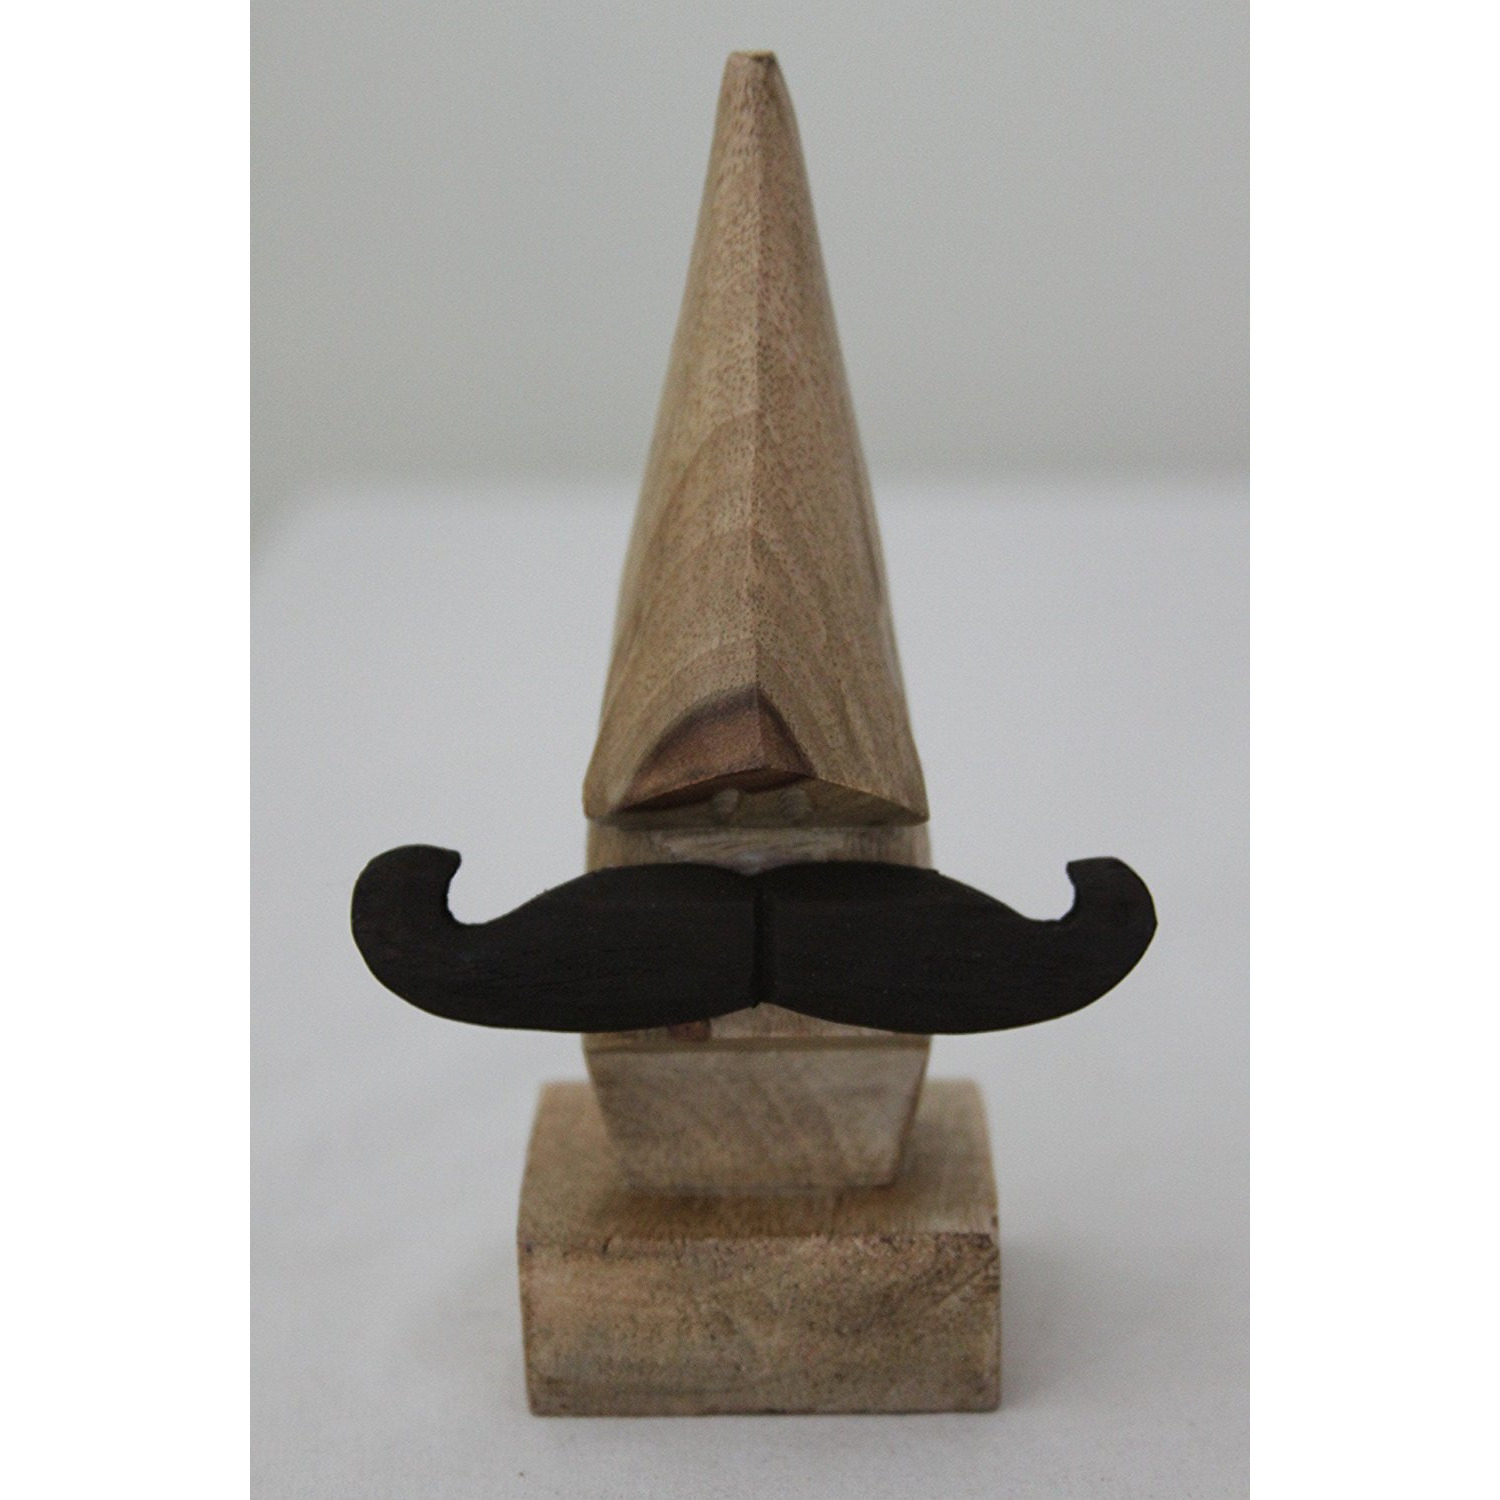 Hand Carved Wooden Eyeglass Spectacle Holder with an Amusing Mustache Home Decorative Christmas Gifts